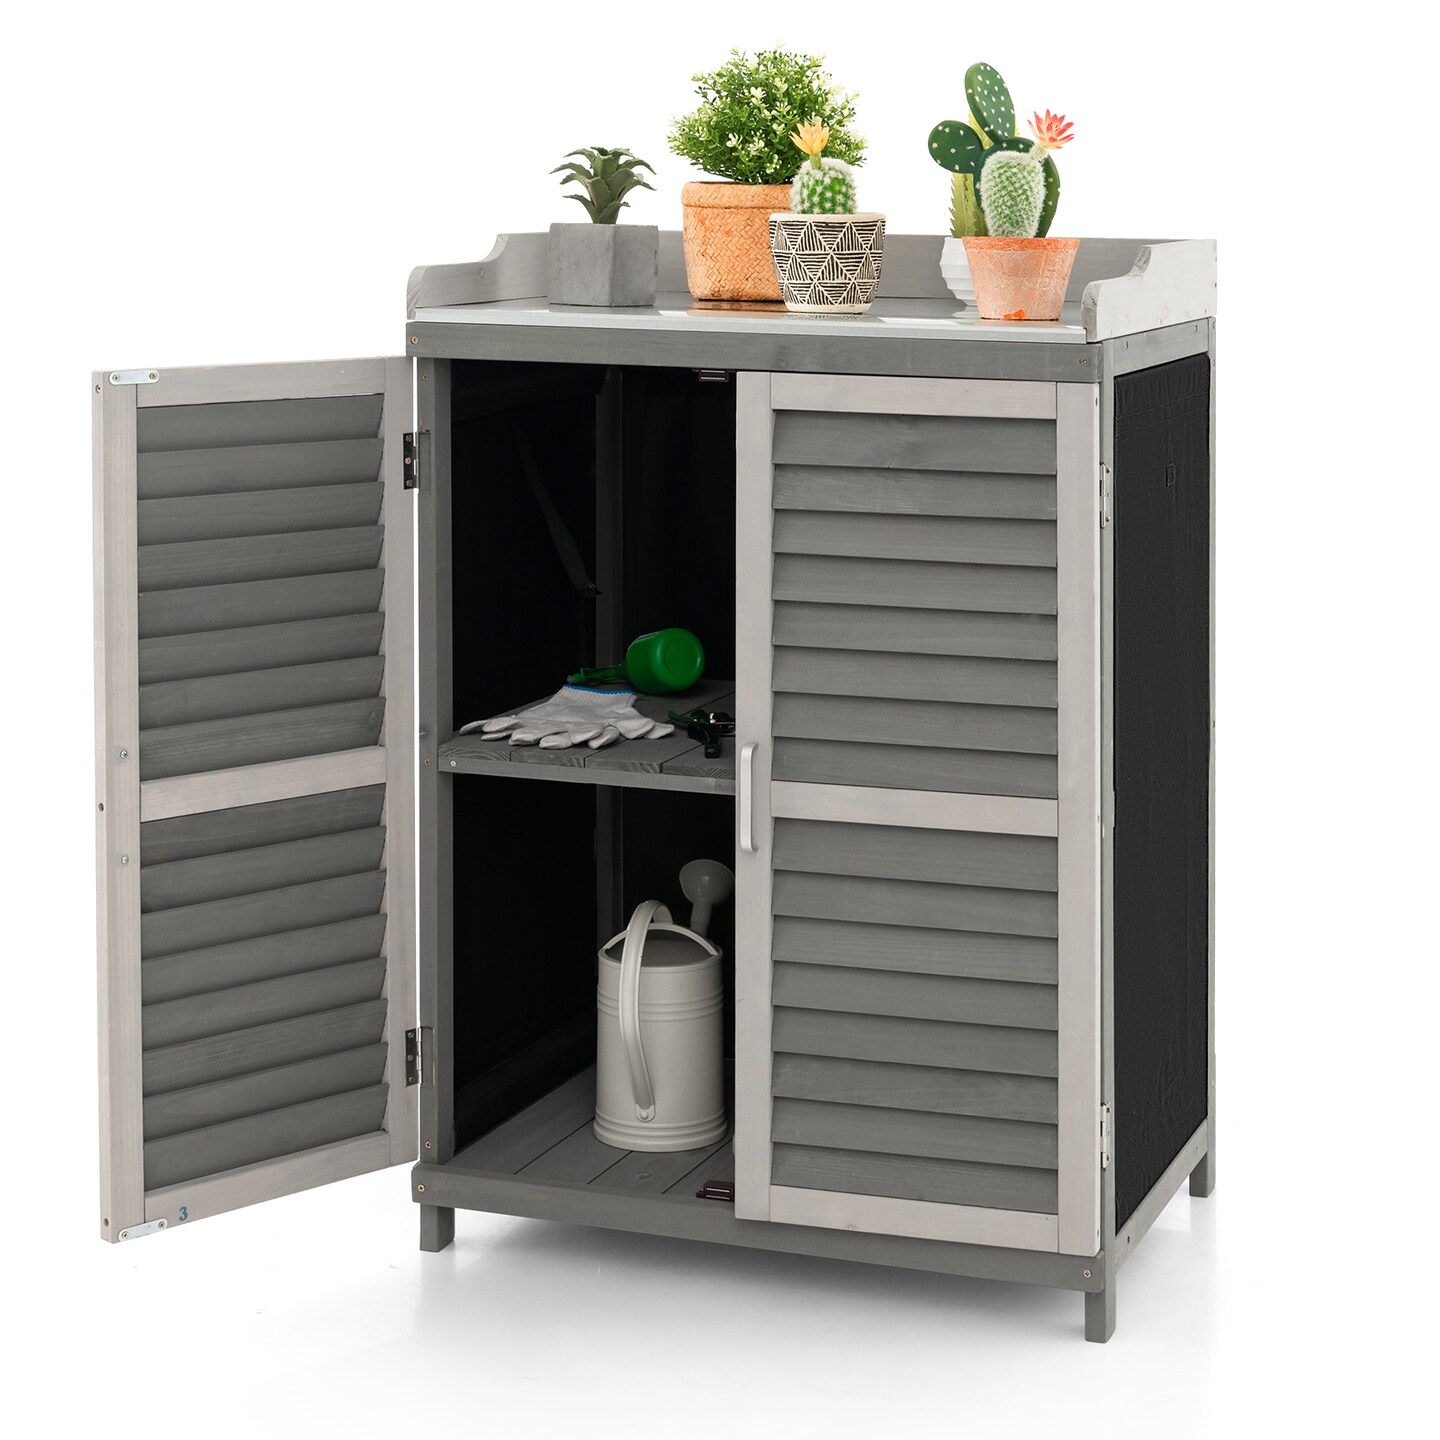 Garden Potting Bench Table with 2 Storage Shelves and Metal Plated Tabletop-Gray